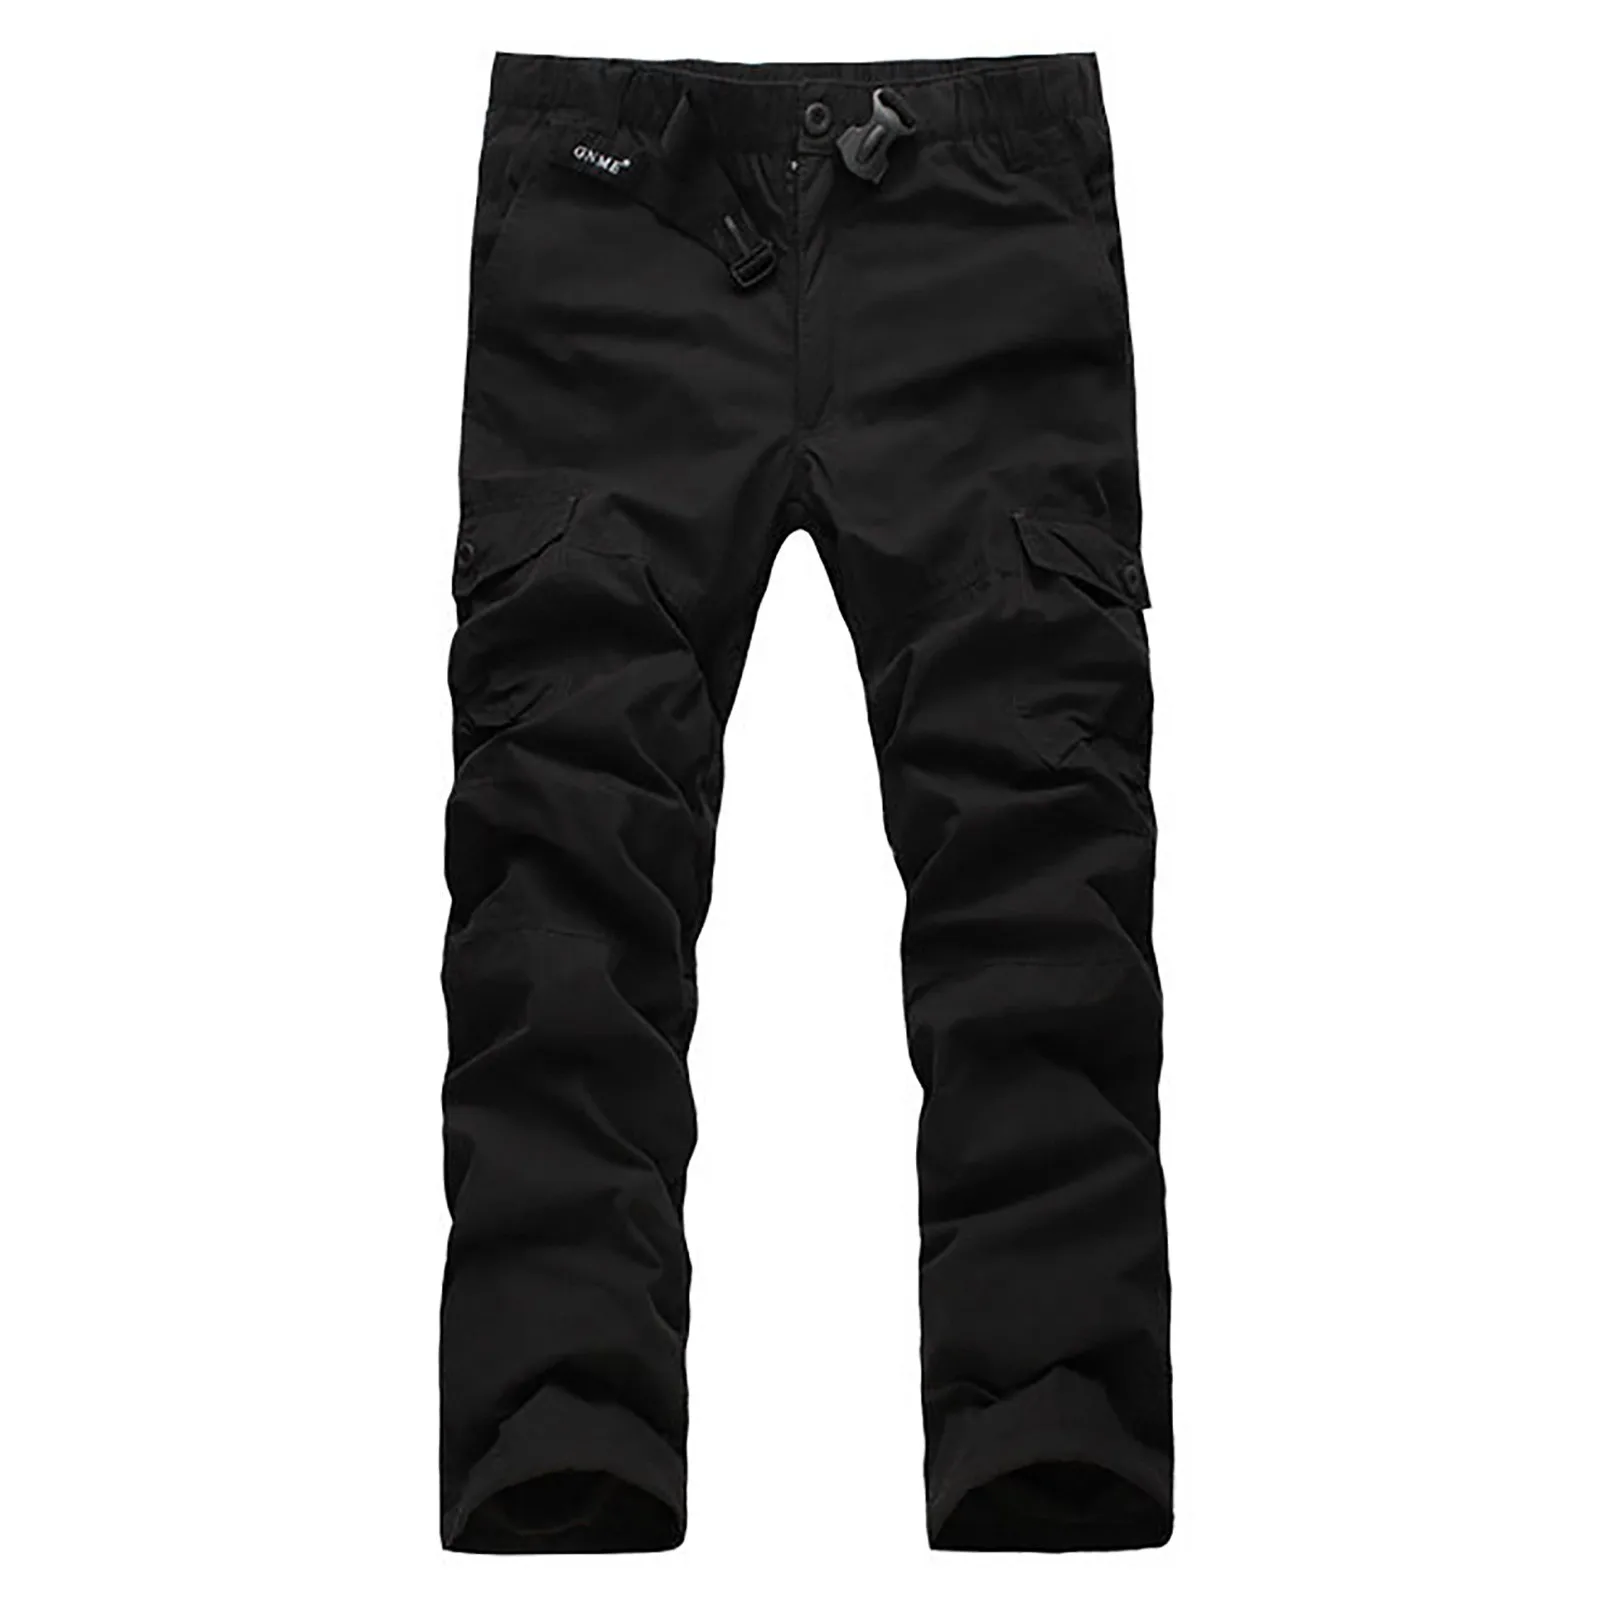 harem trousers Male Casual Pants Jeans Men's Cargo Trousers Work Wear Combat Safety Cargo 6 Pocket Full Pants hombr joggers masculino jeans#go alibaba pants